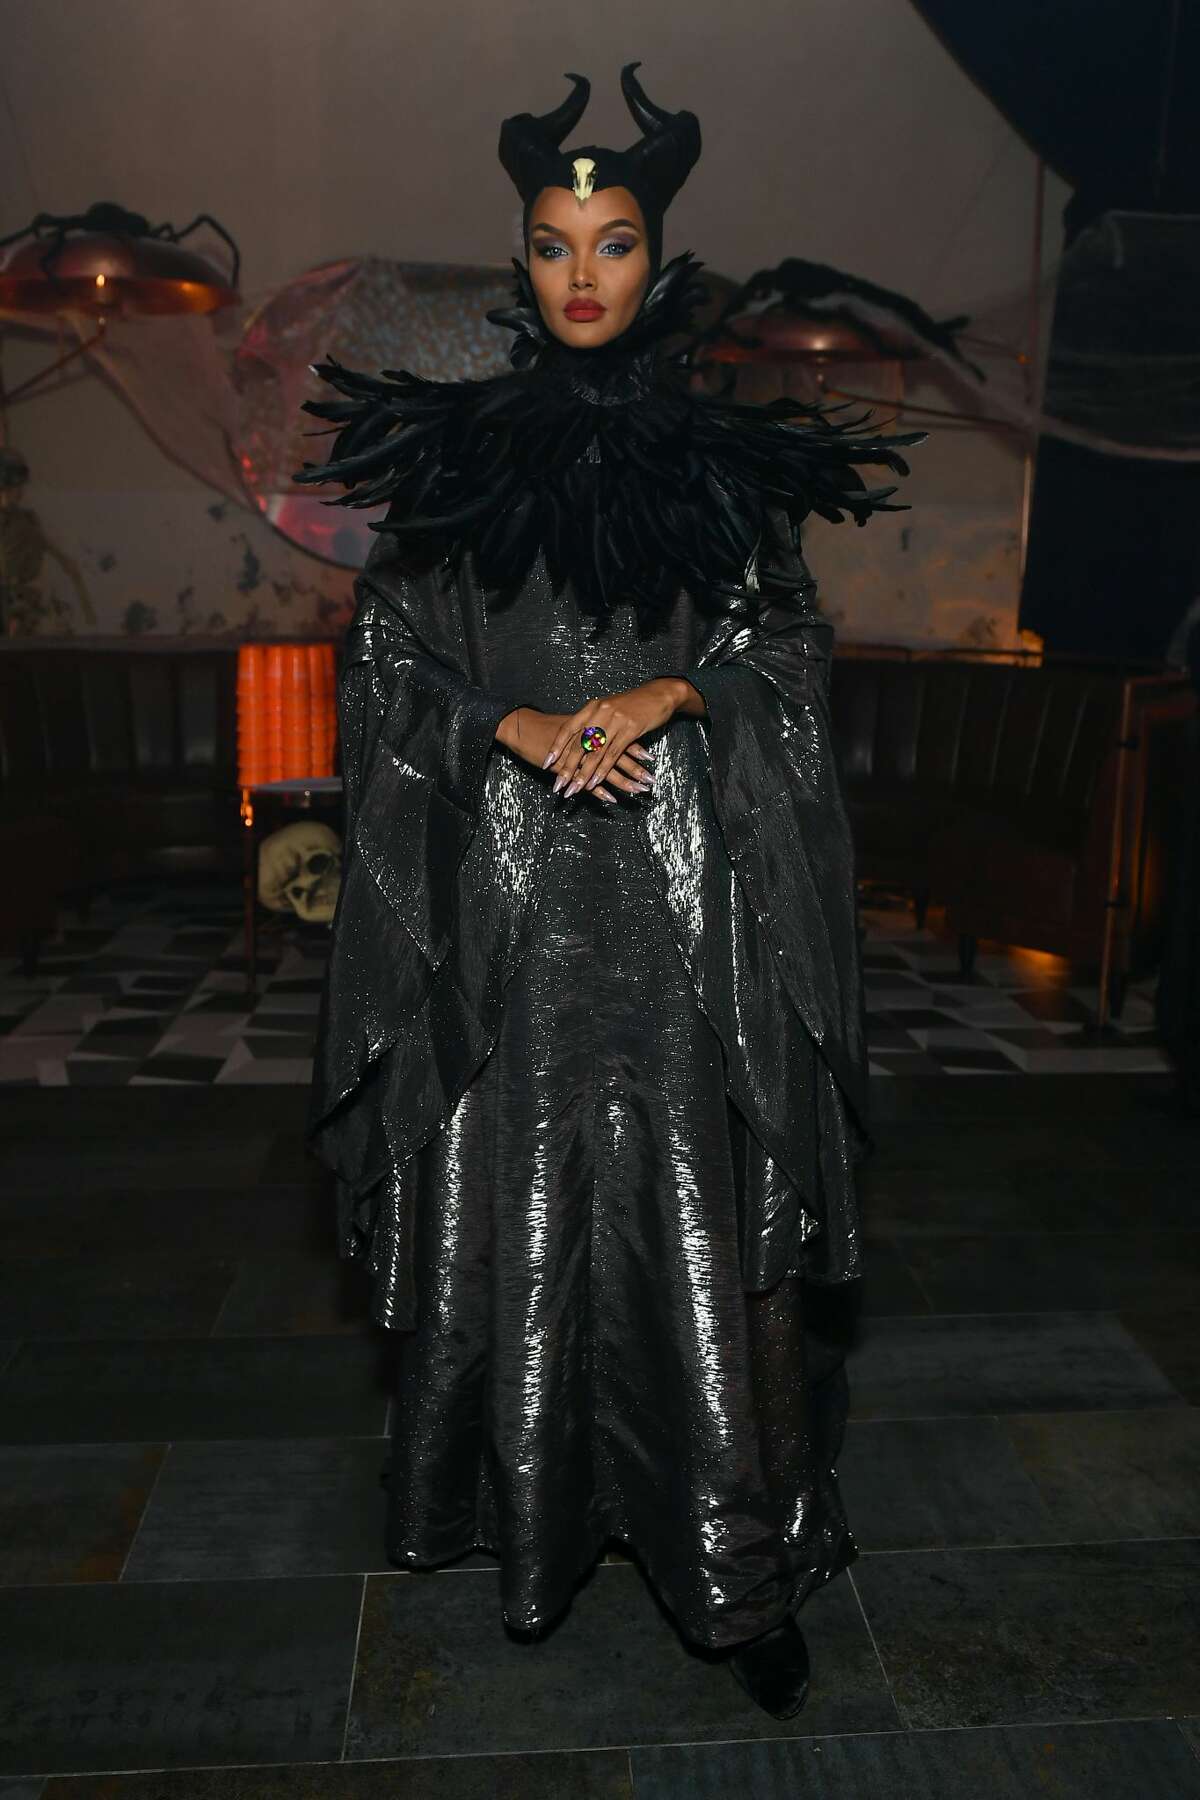 Halima Aden attends Heidi Klum's 20th Annual Halloween Party presented by Amazon Prime Video and SVEDKA Vodka at CathÃ©drale New York on October 31, 2019 in New York City. (Photo by Mike Coppola/Getty Images for Heidi Klum)